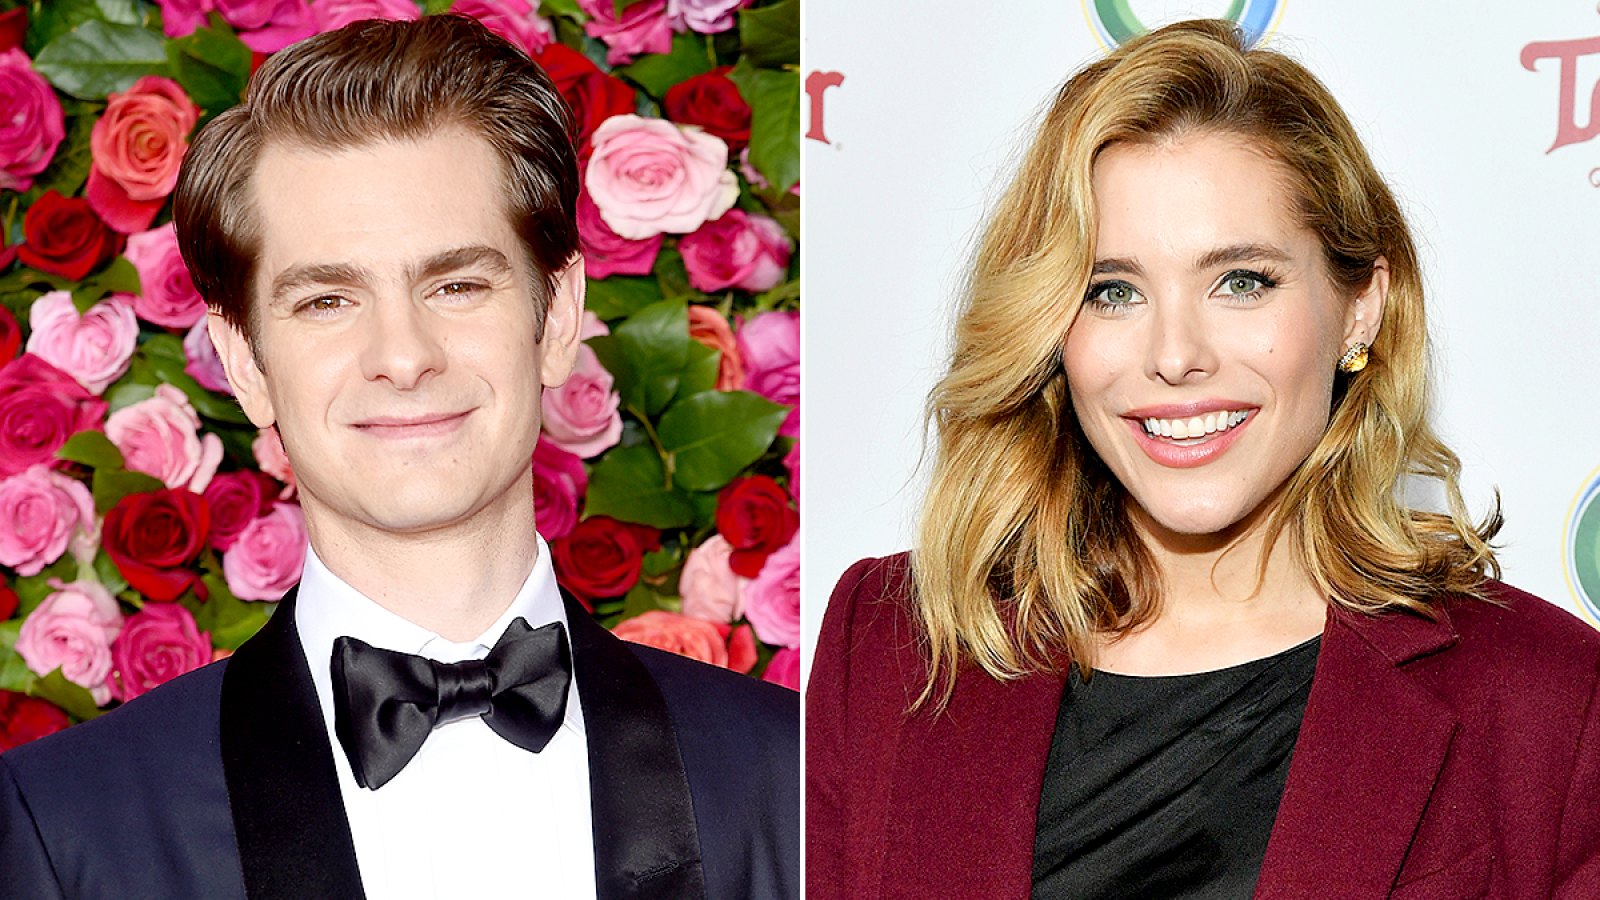 Andrew-Garfield-Is-Dating-Susie-Abromeit